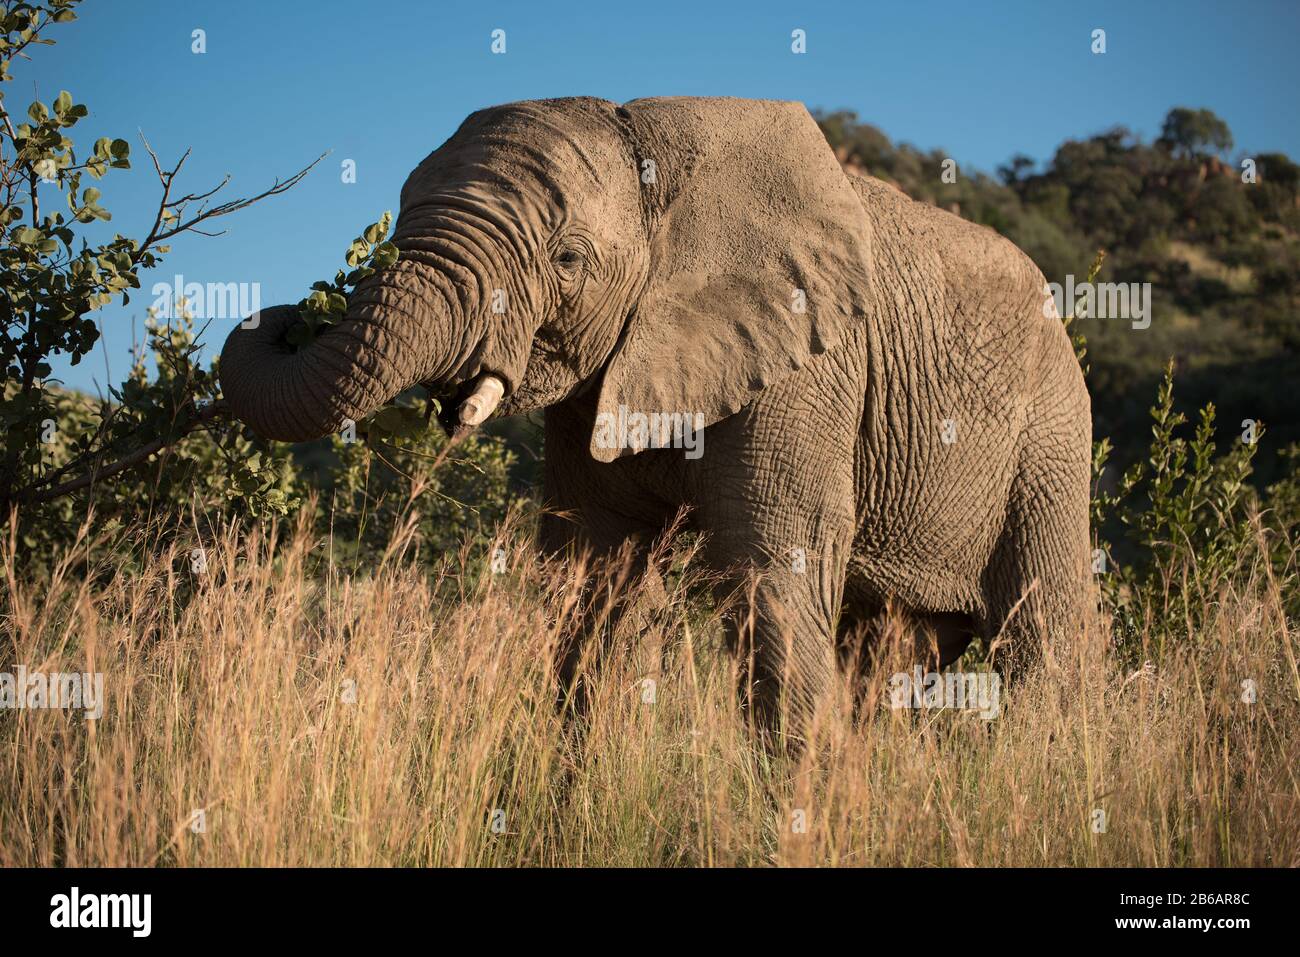 An African elephant (Loxodonta africana) grazing amidst the tall grass and shrubs in Pilansberg National Park, South Africa Stock Photo